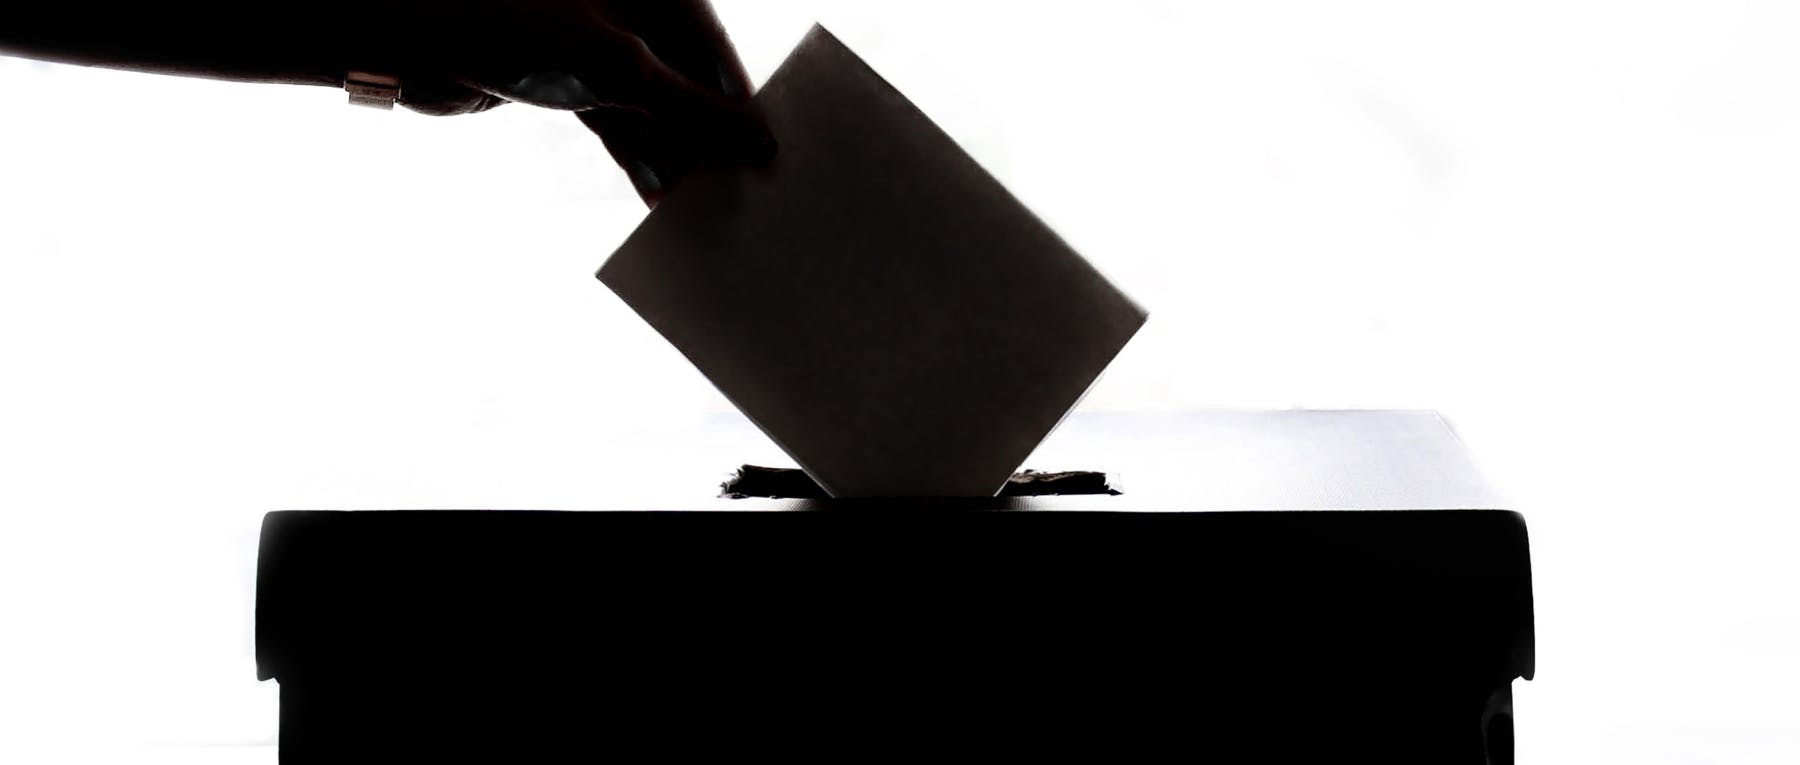 Shadow of an election ballot box and hand voting